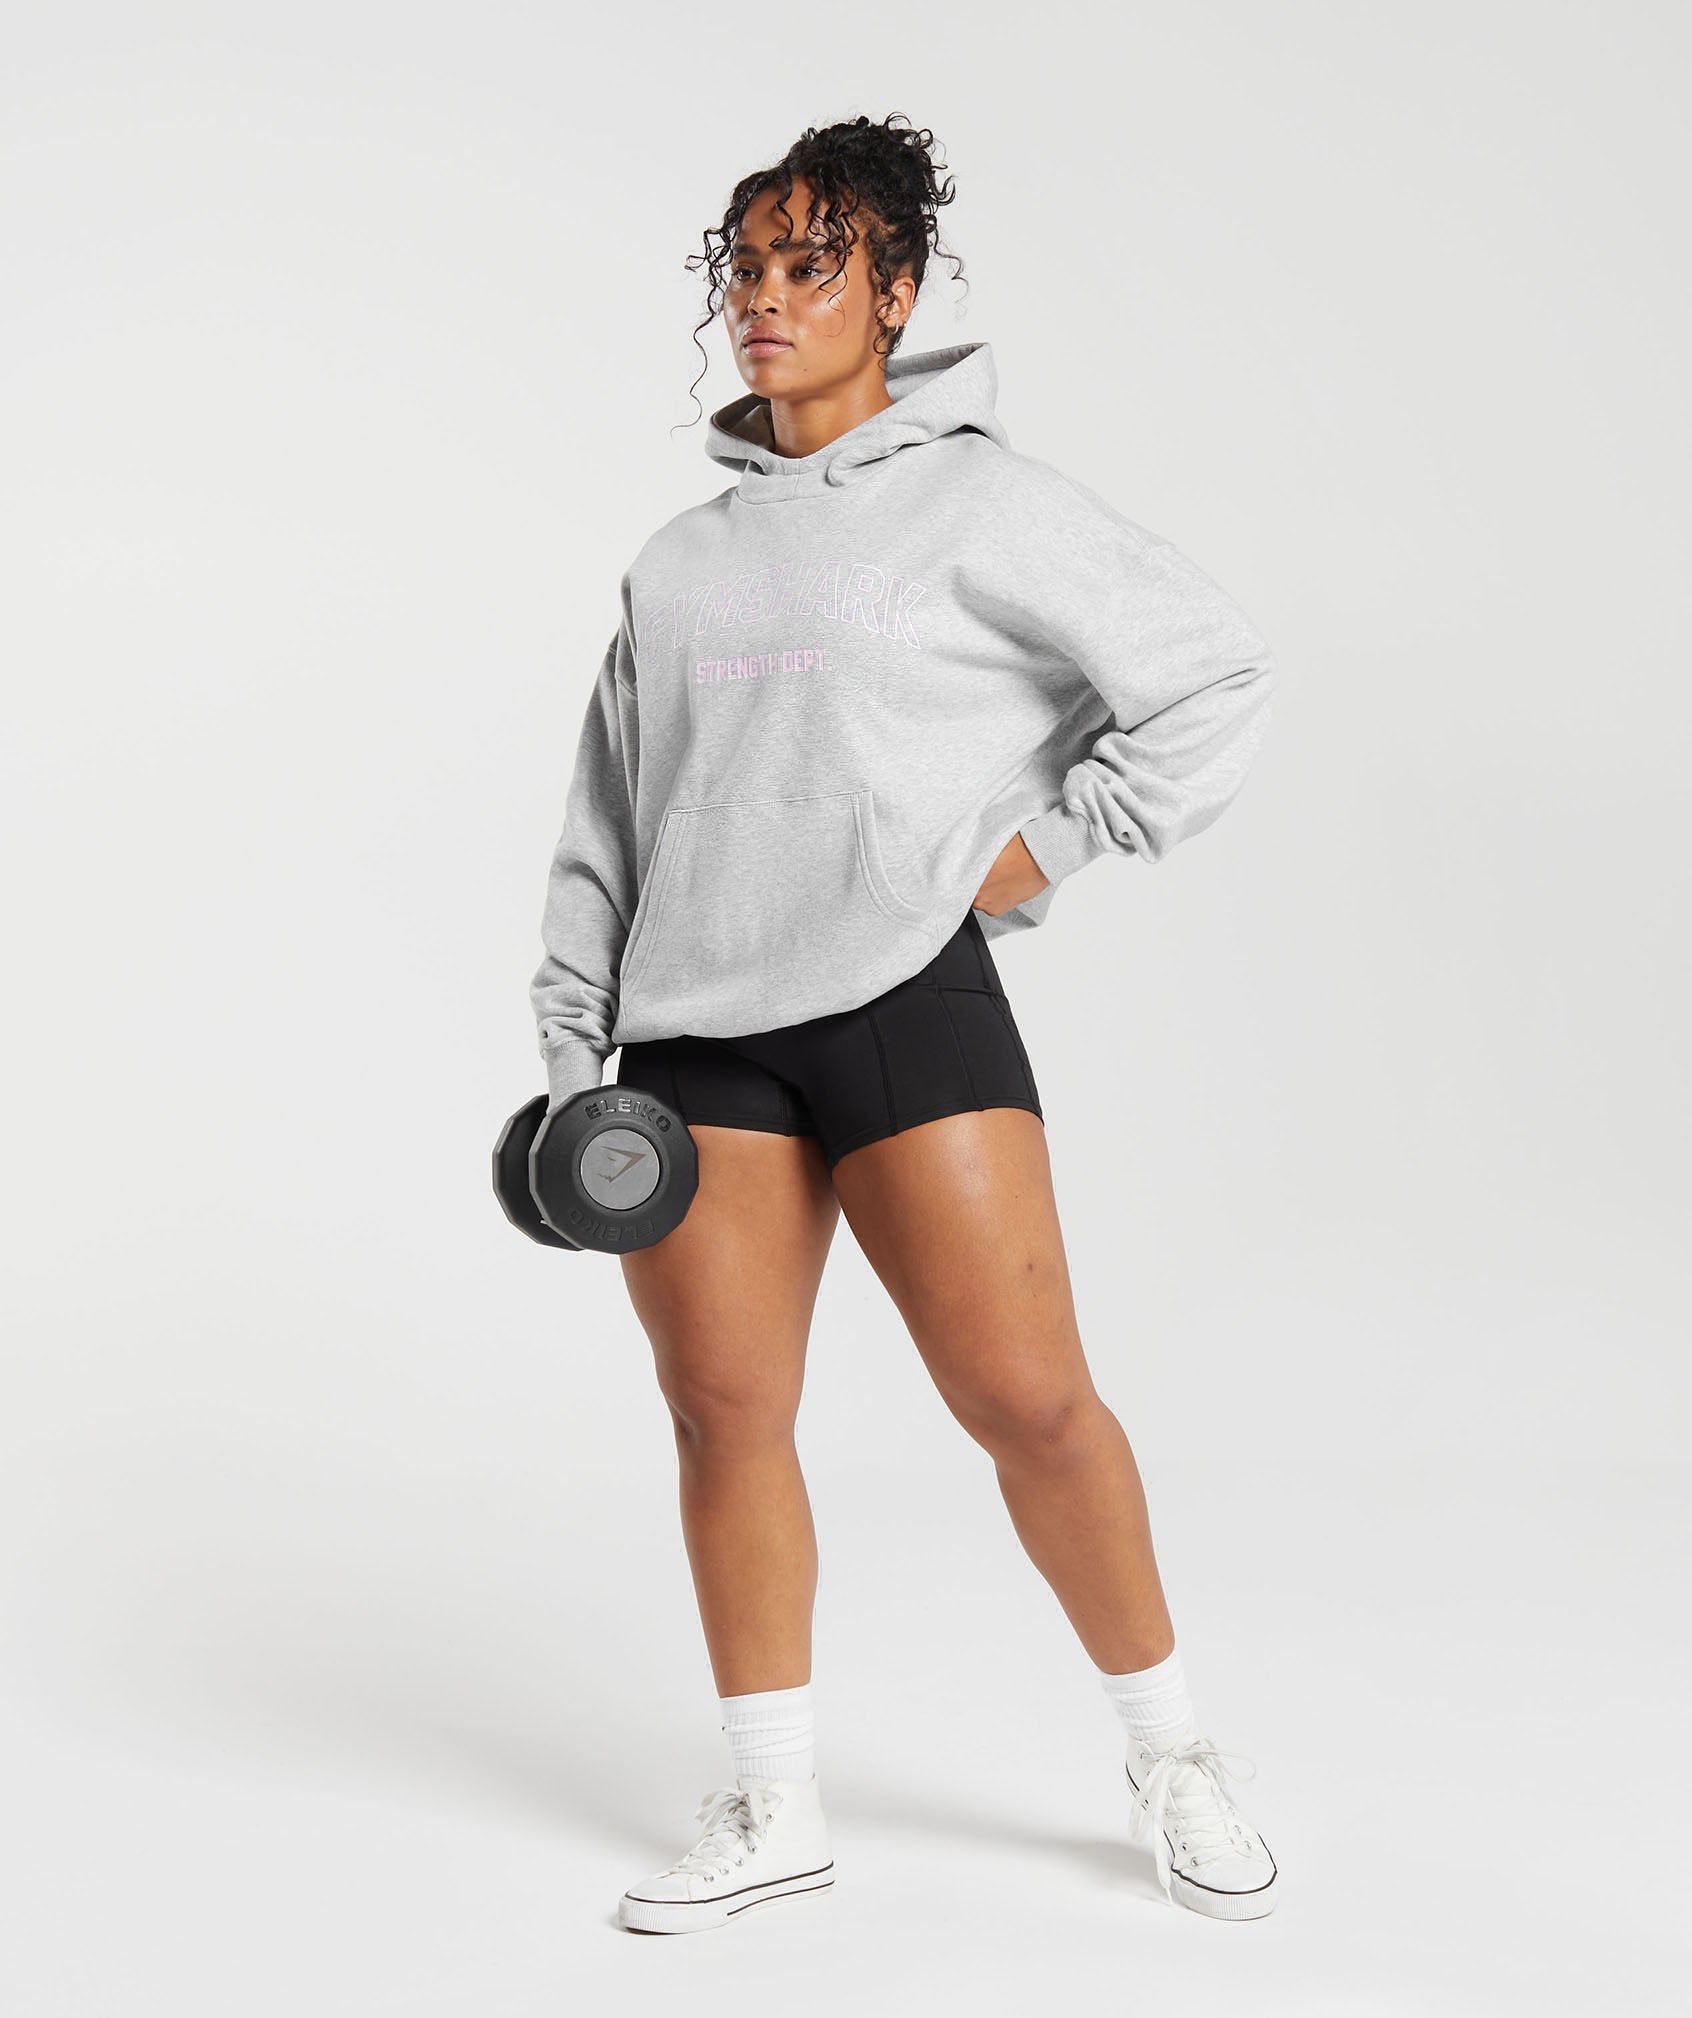 Strength Department Graphic Hoodie